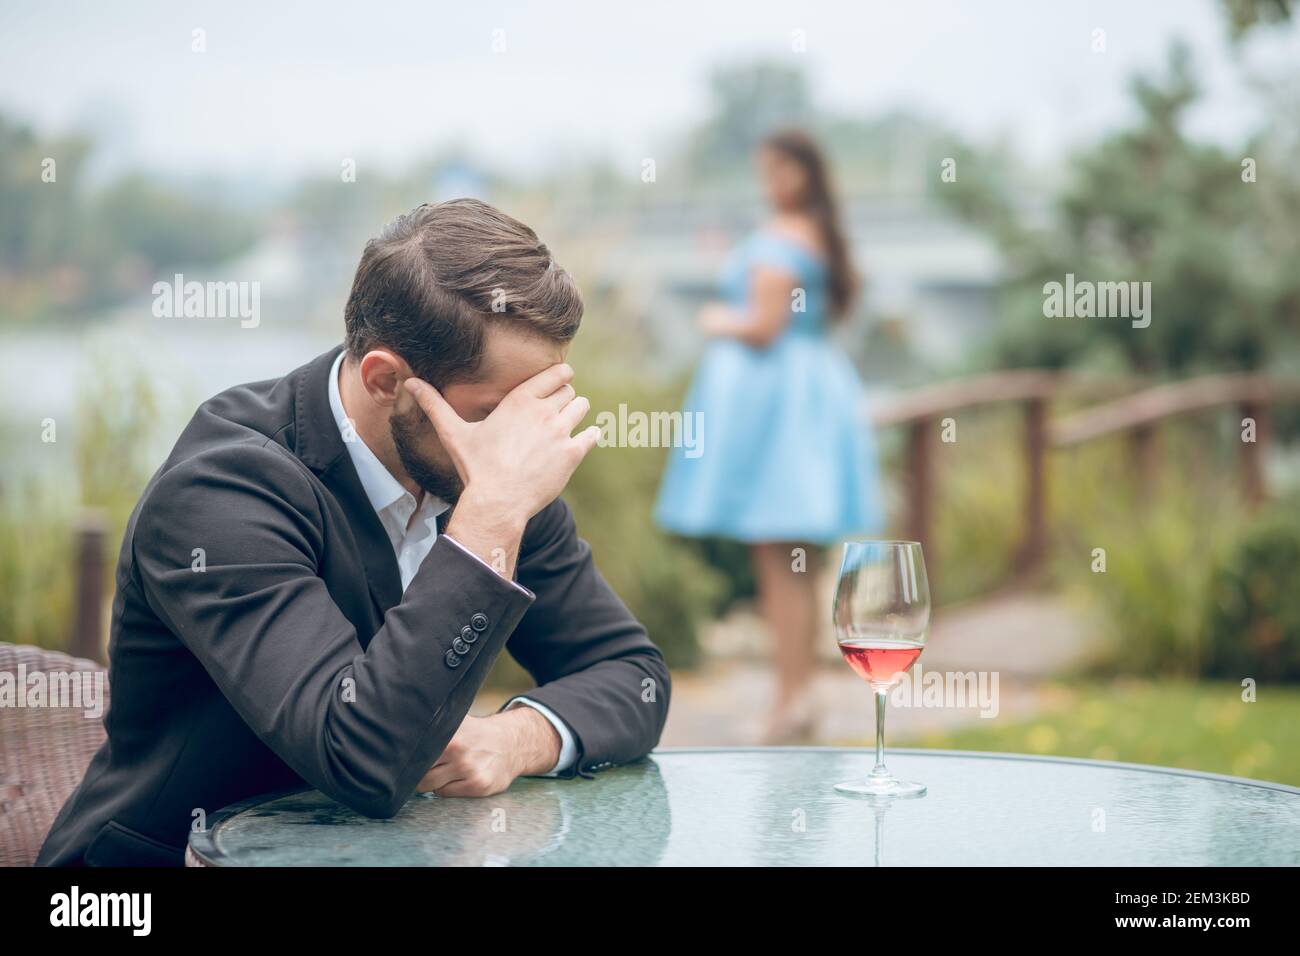 Unhappy man at table and woman in distance Stock Photo